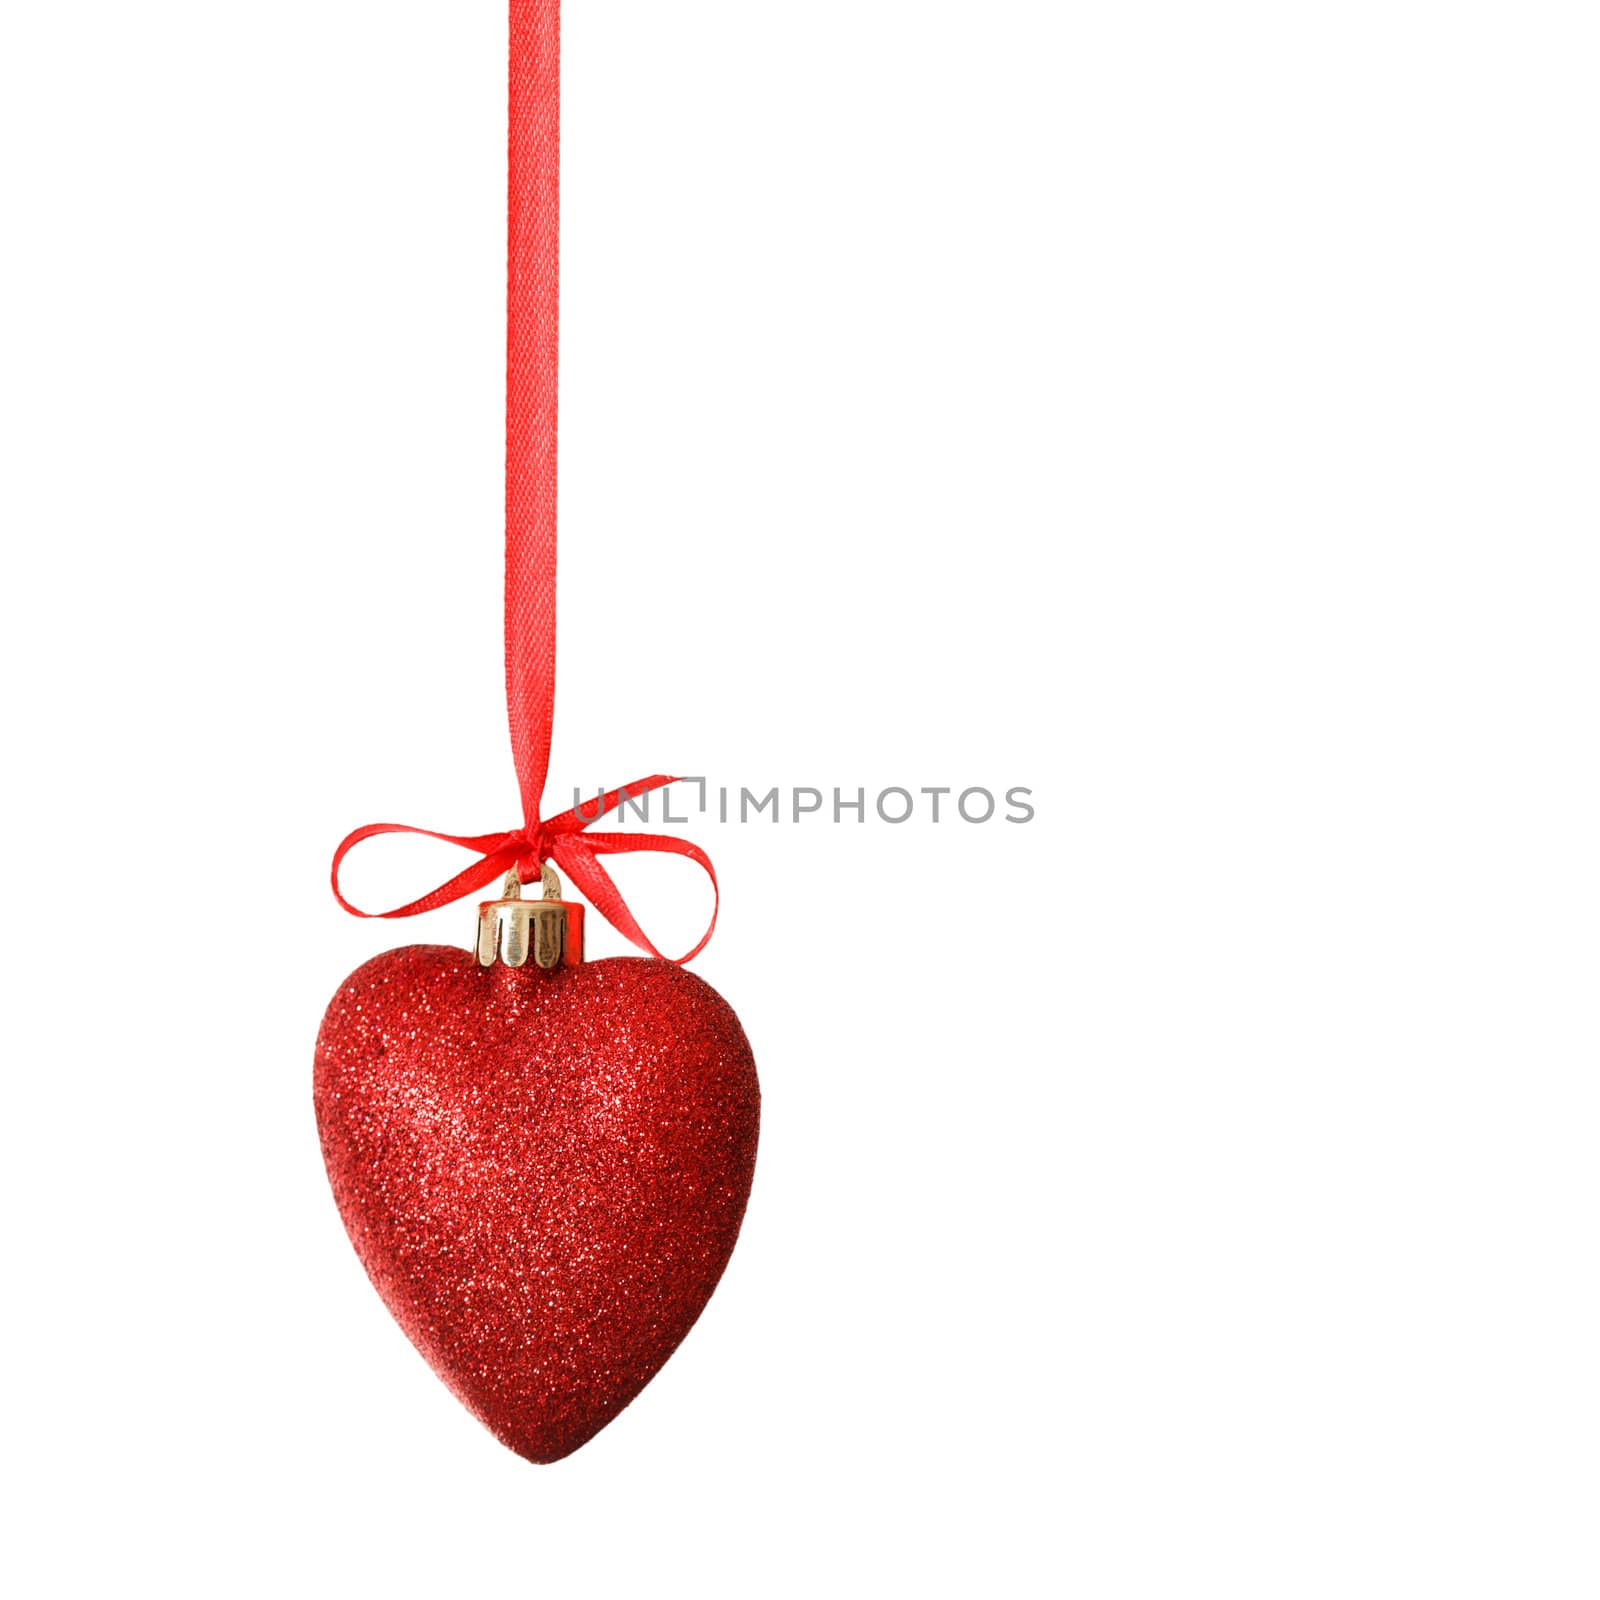  red heart on ribbon by shebeko